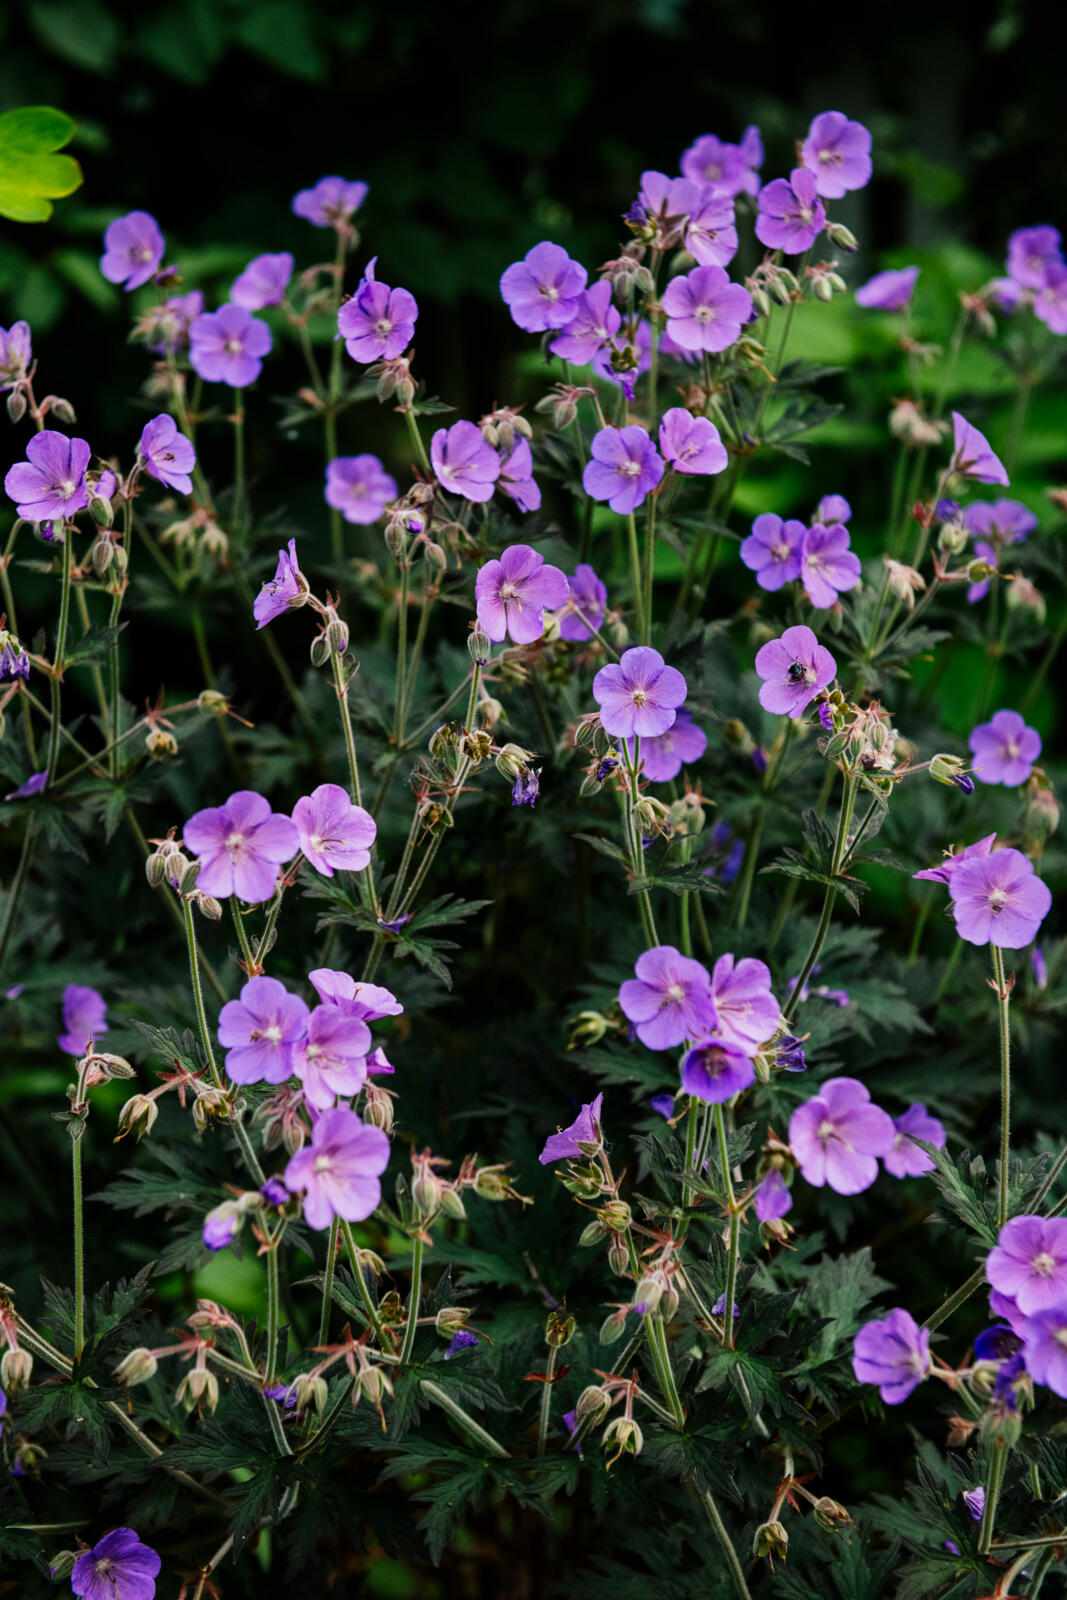 Cranesbill, also known as perennial geranium, forms small clumps and blooms from spring to fall. A few favorite varieties include ‘Rozanne’ in purple or ‘Biokova’ in blush pink.